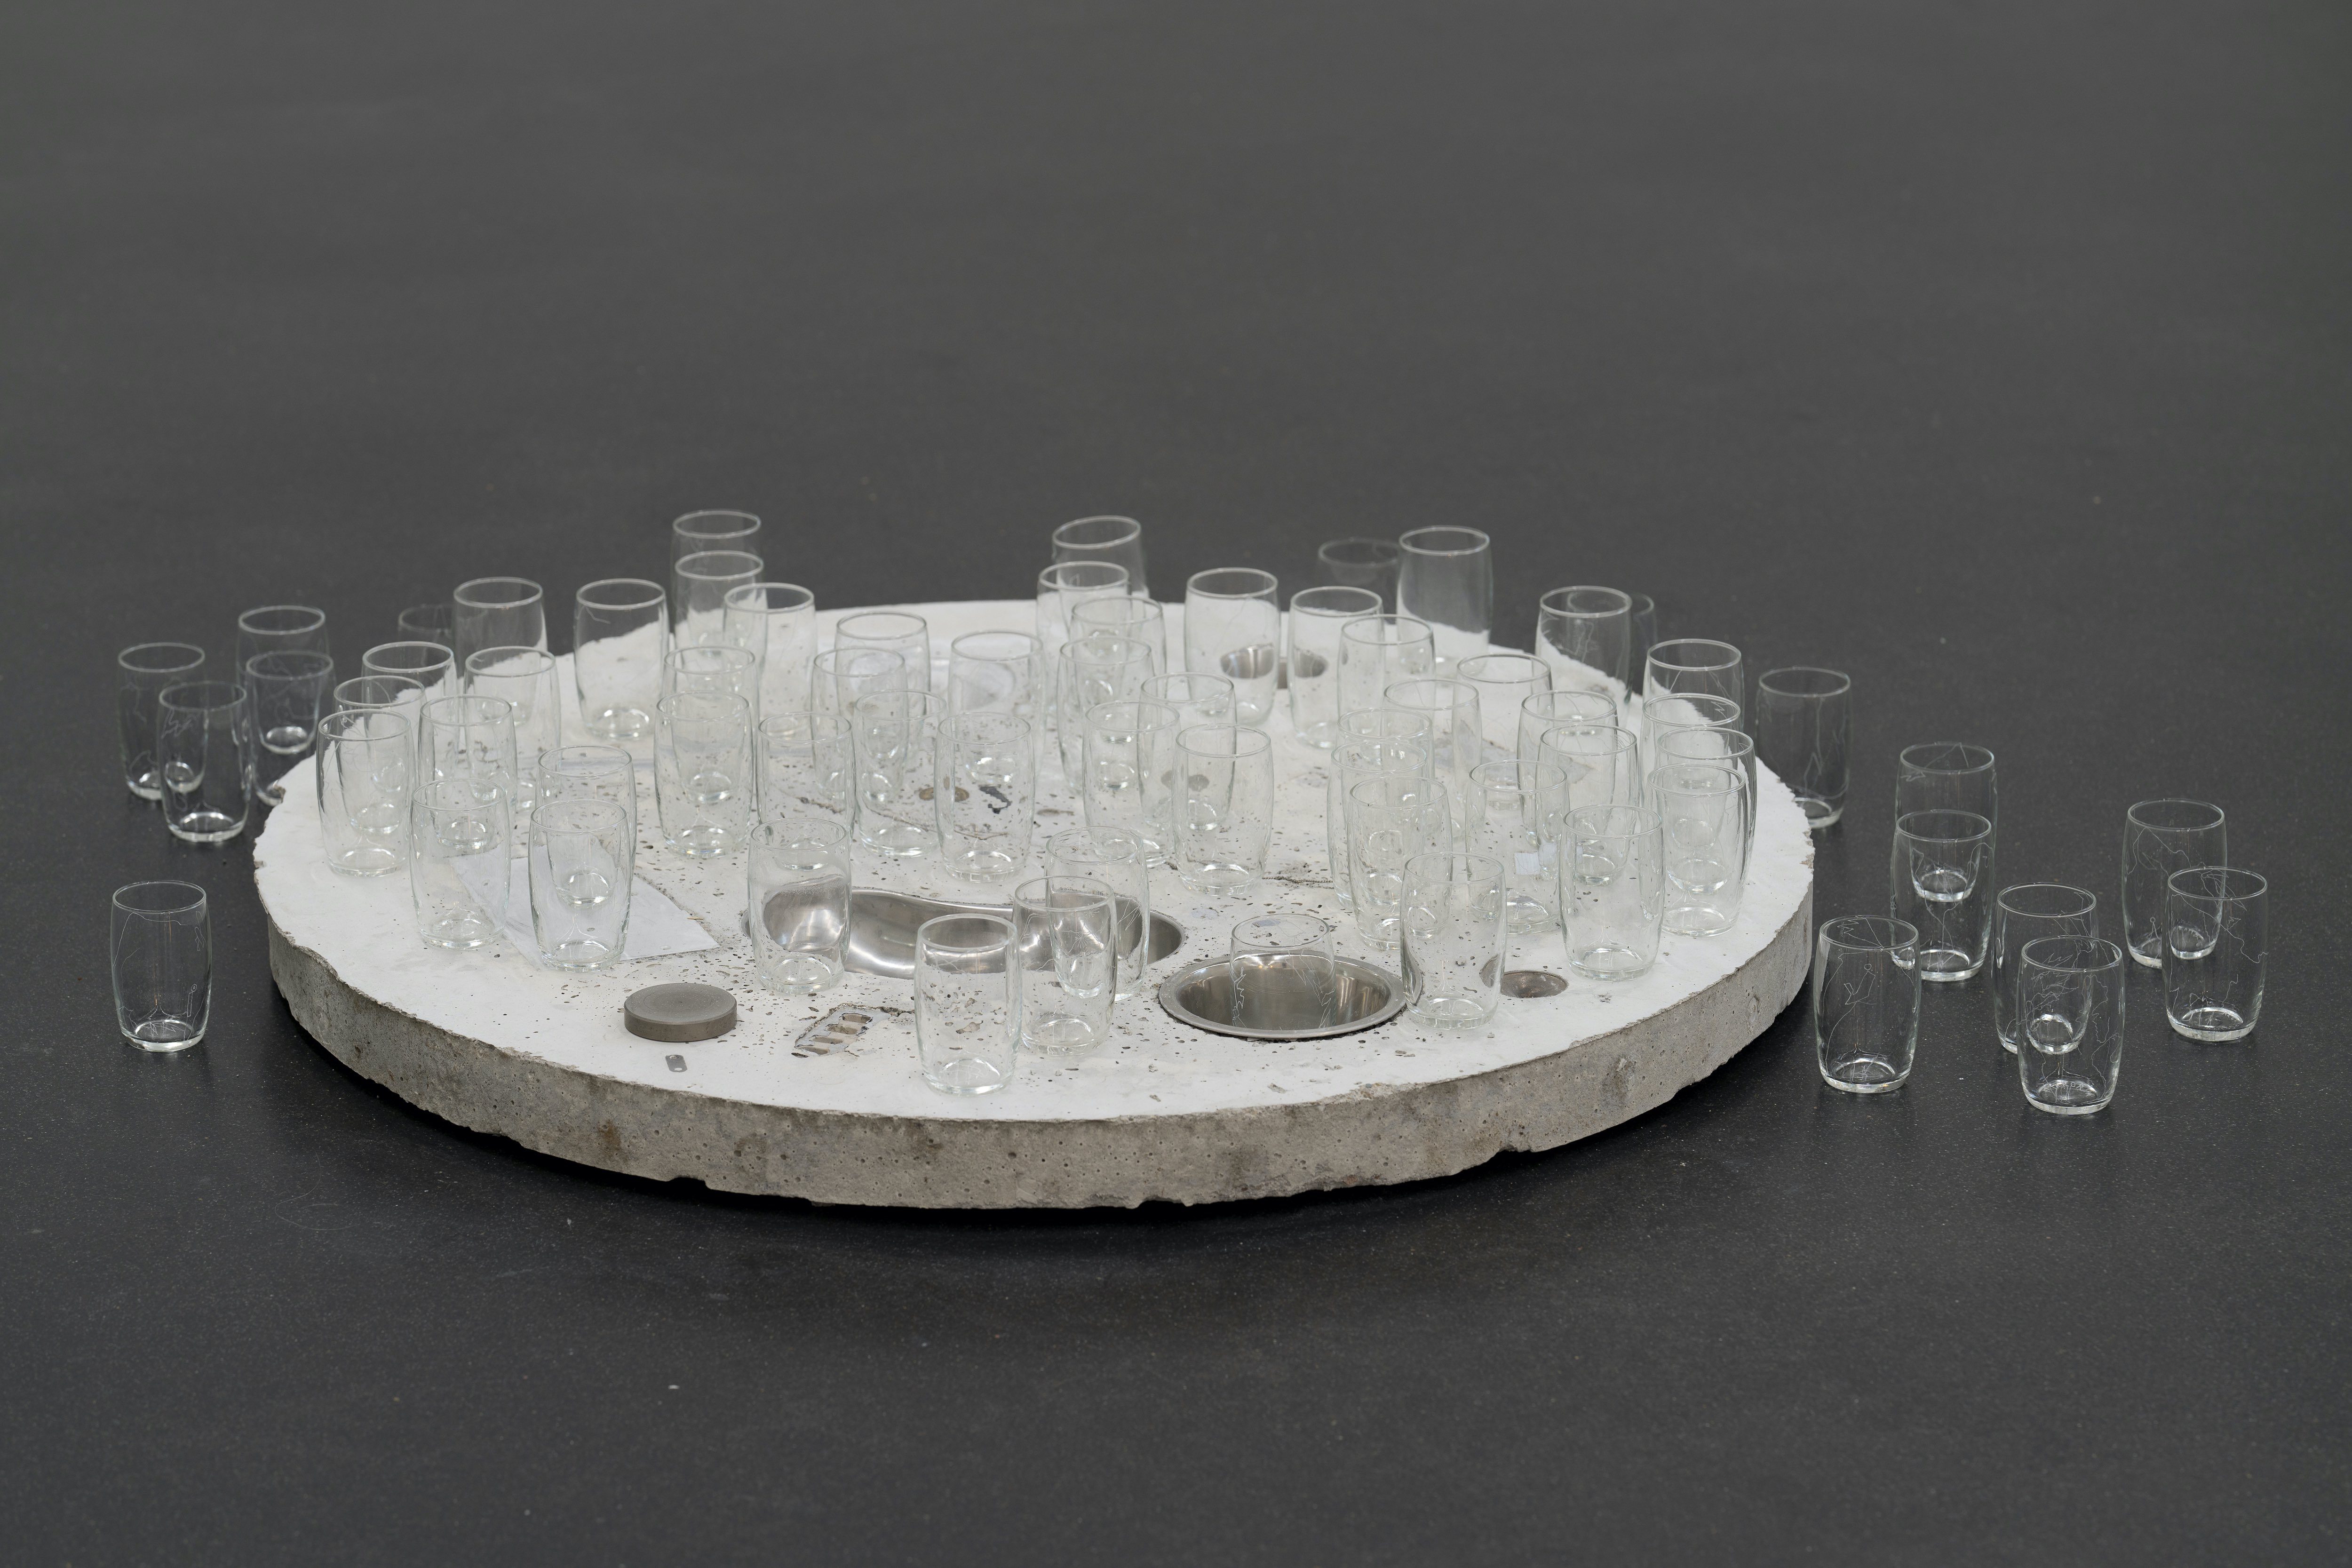 Table and Glasses (some of 250) 2022 Concrete, electrical scrap, found objects, engraved drinking glasses Width (table) 90 cm